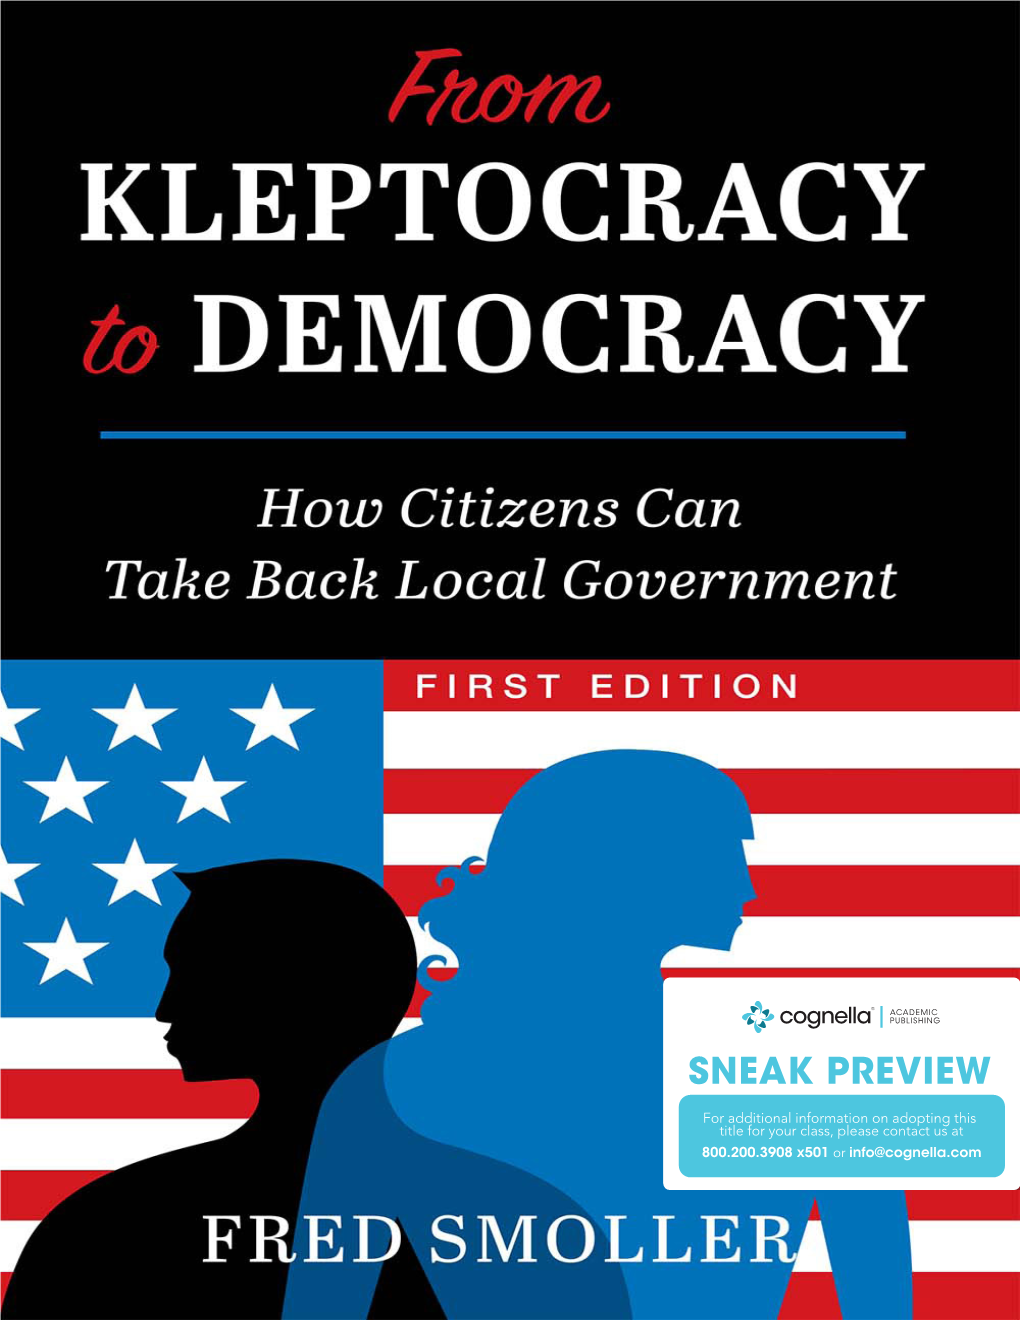 From Kleptocracy to Democracy